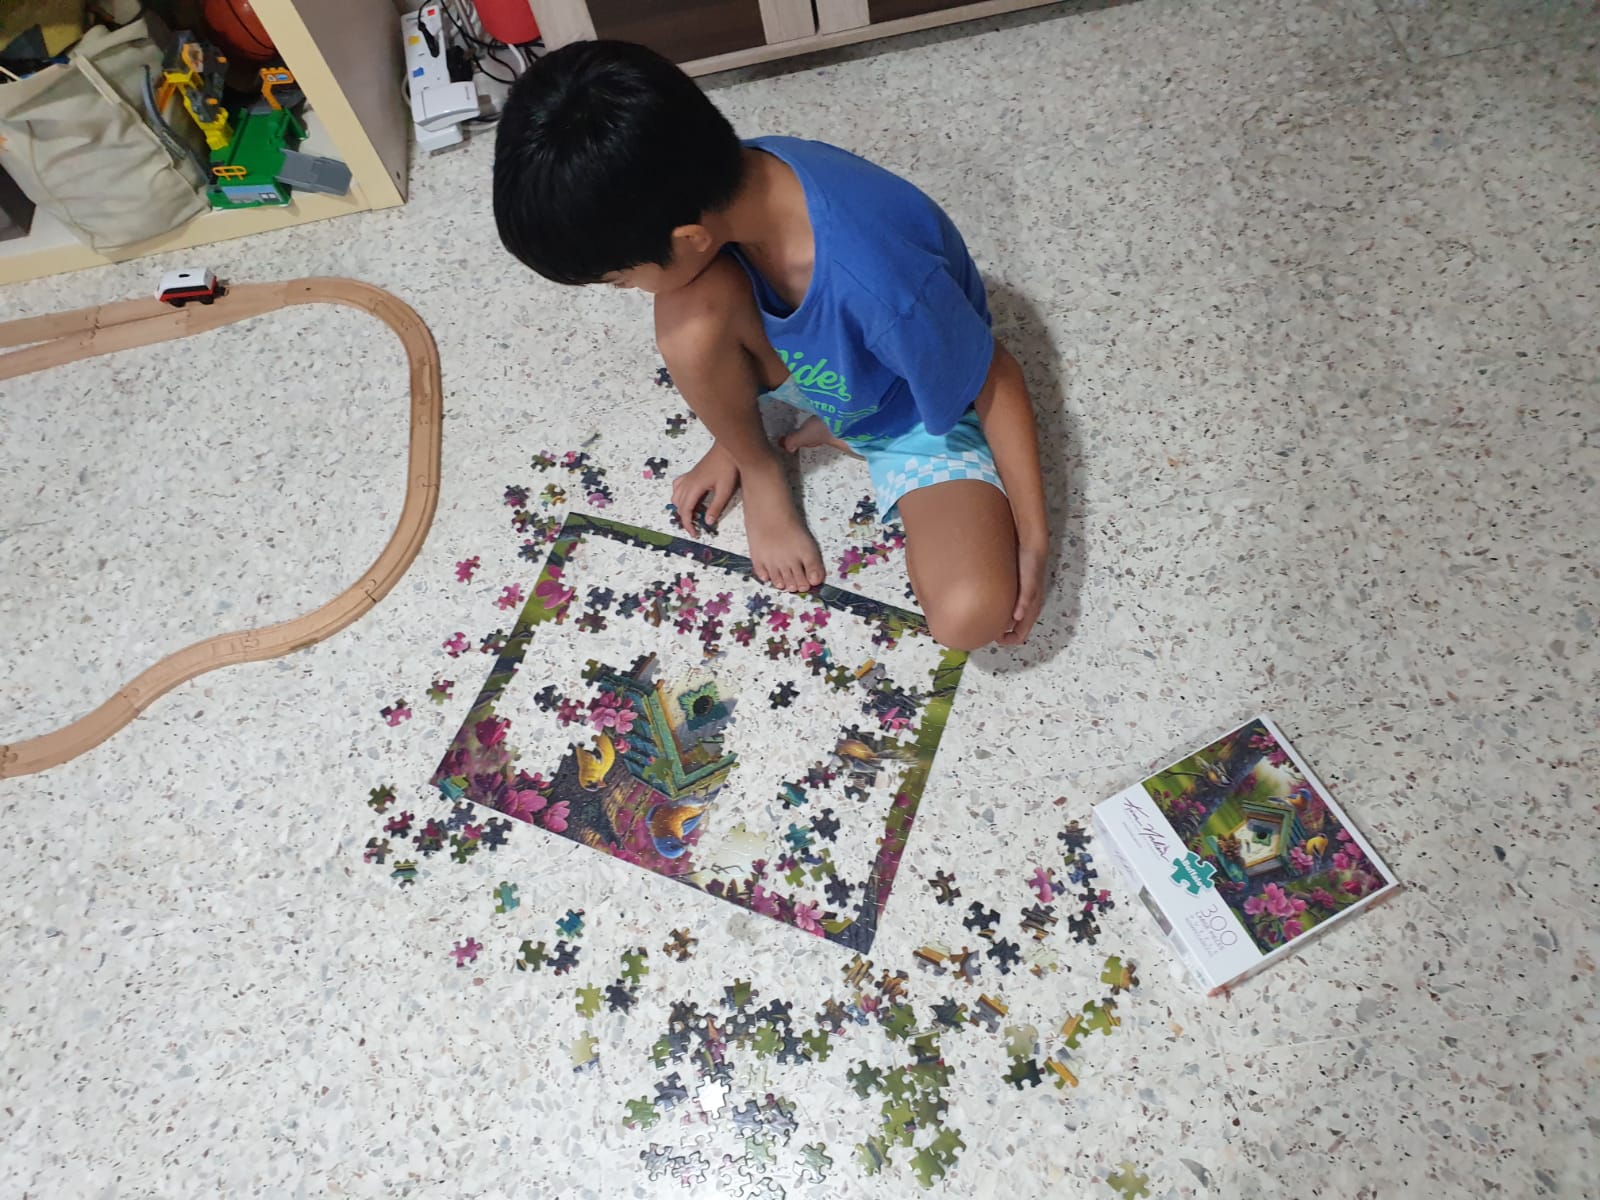 Josiah loves puzzles and can complete complex ones all on his own.